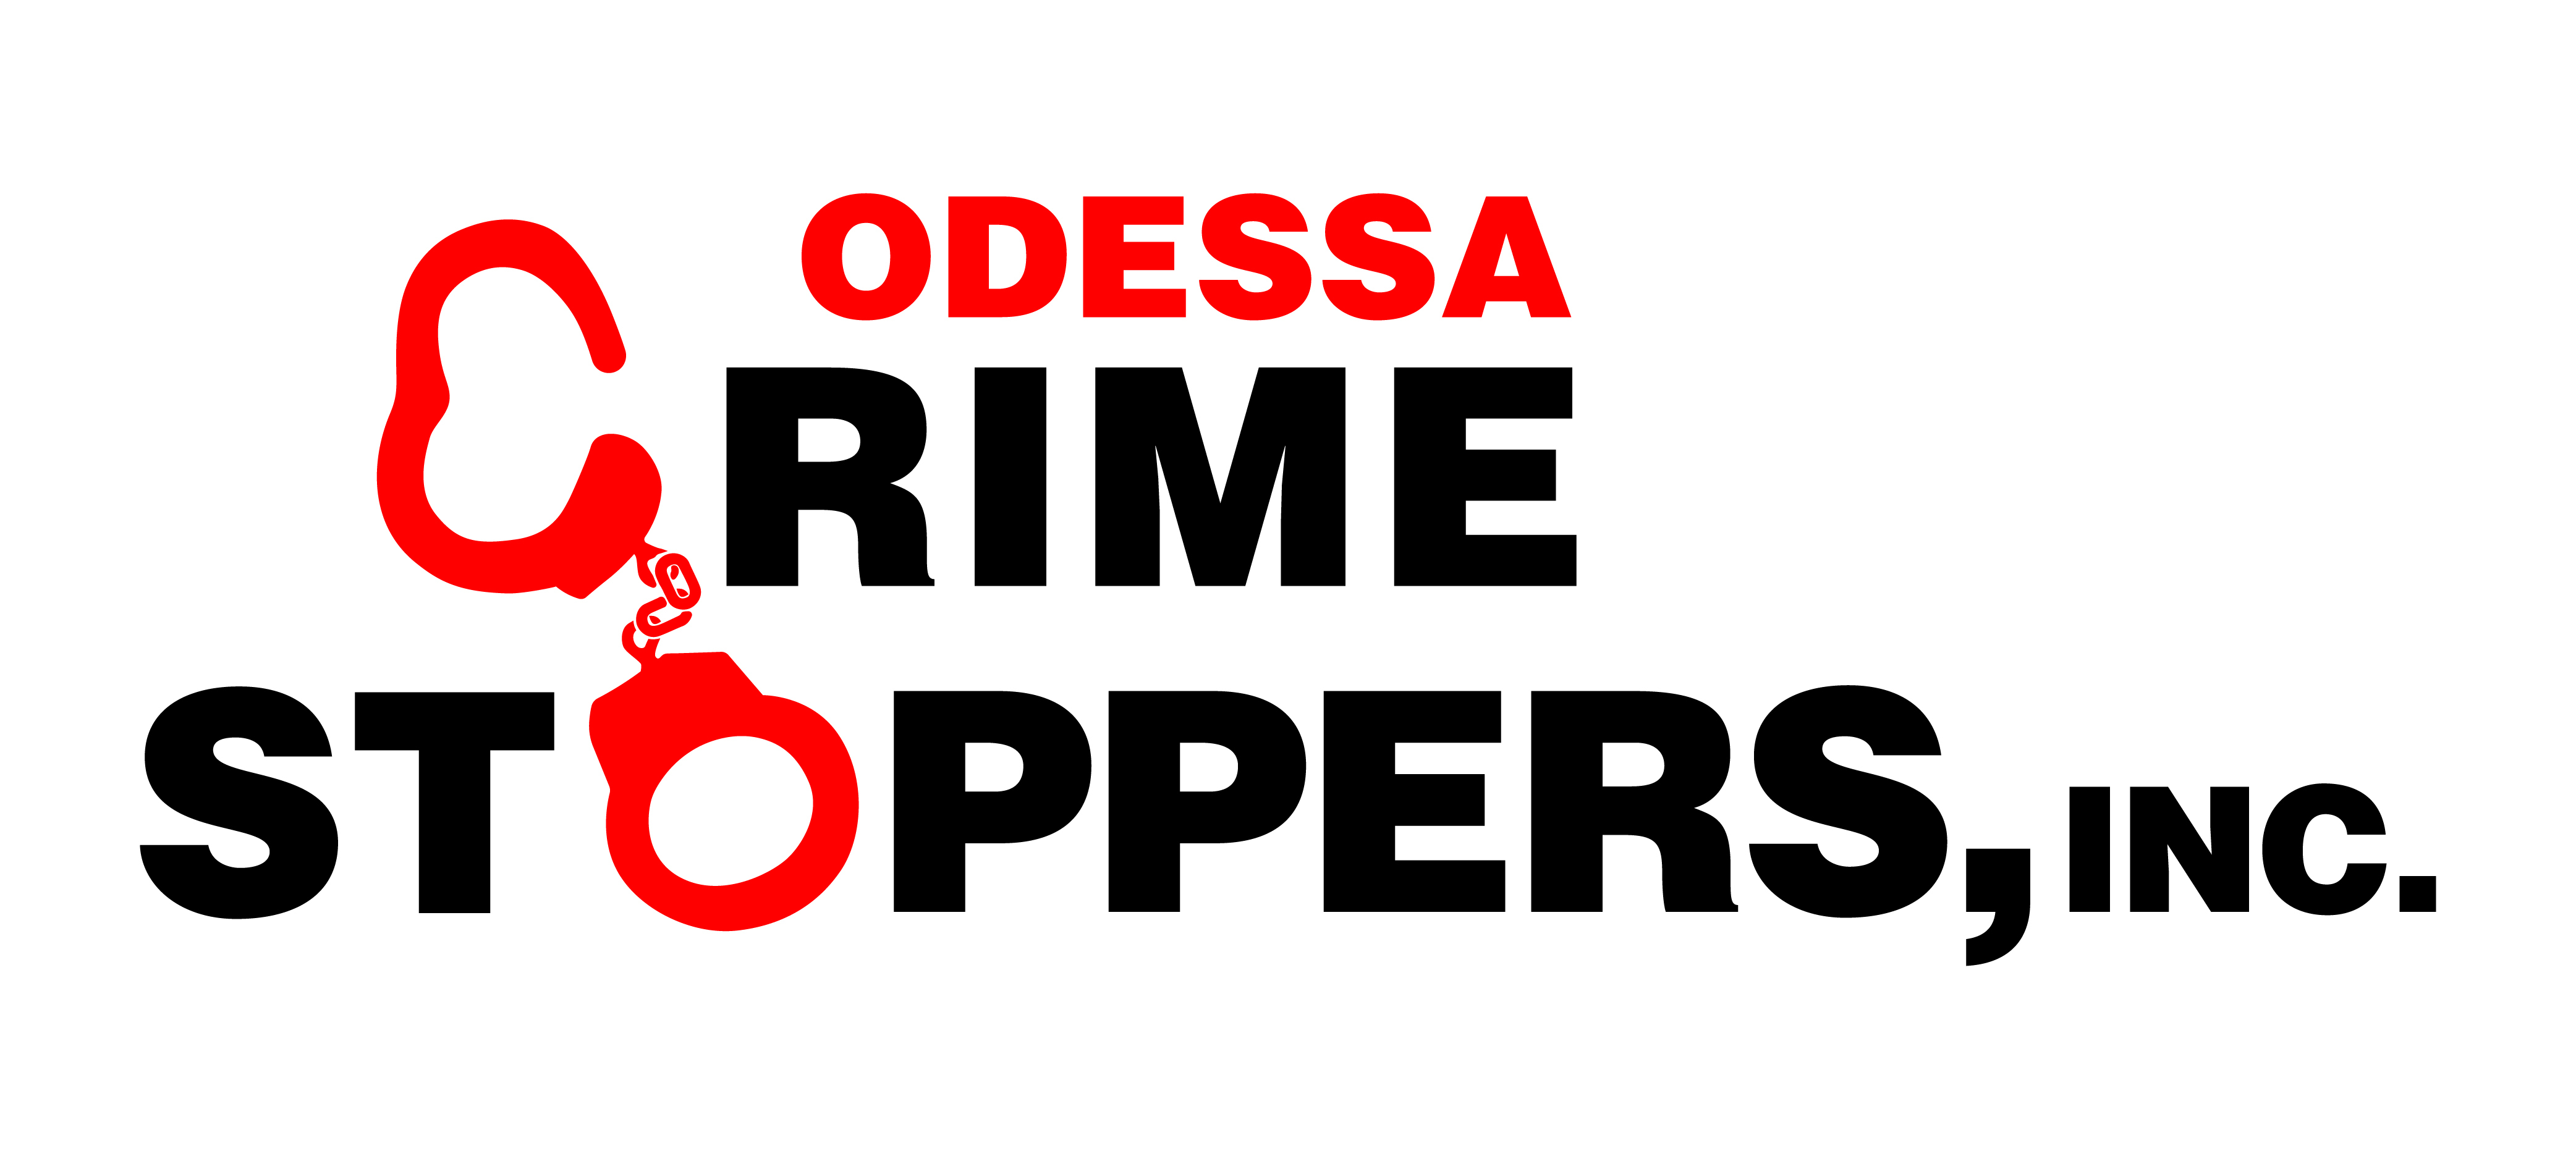 Odessa Crime Stoppers Inc